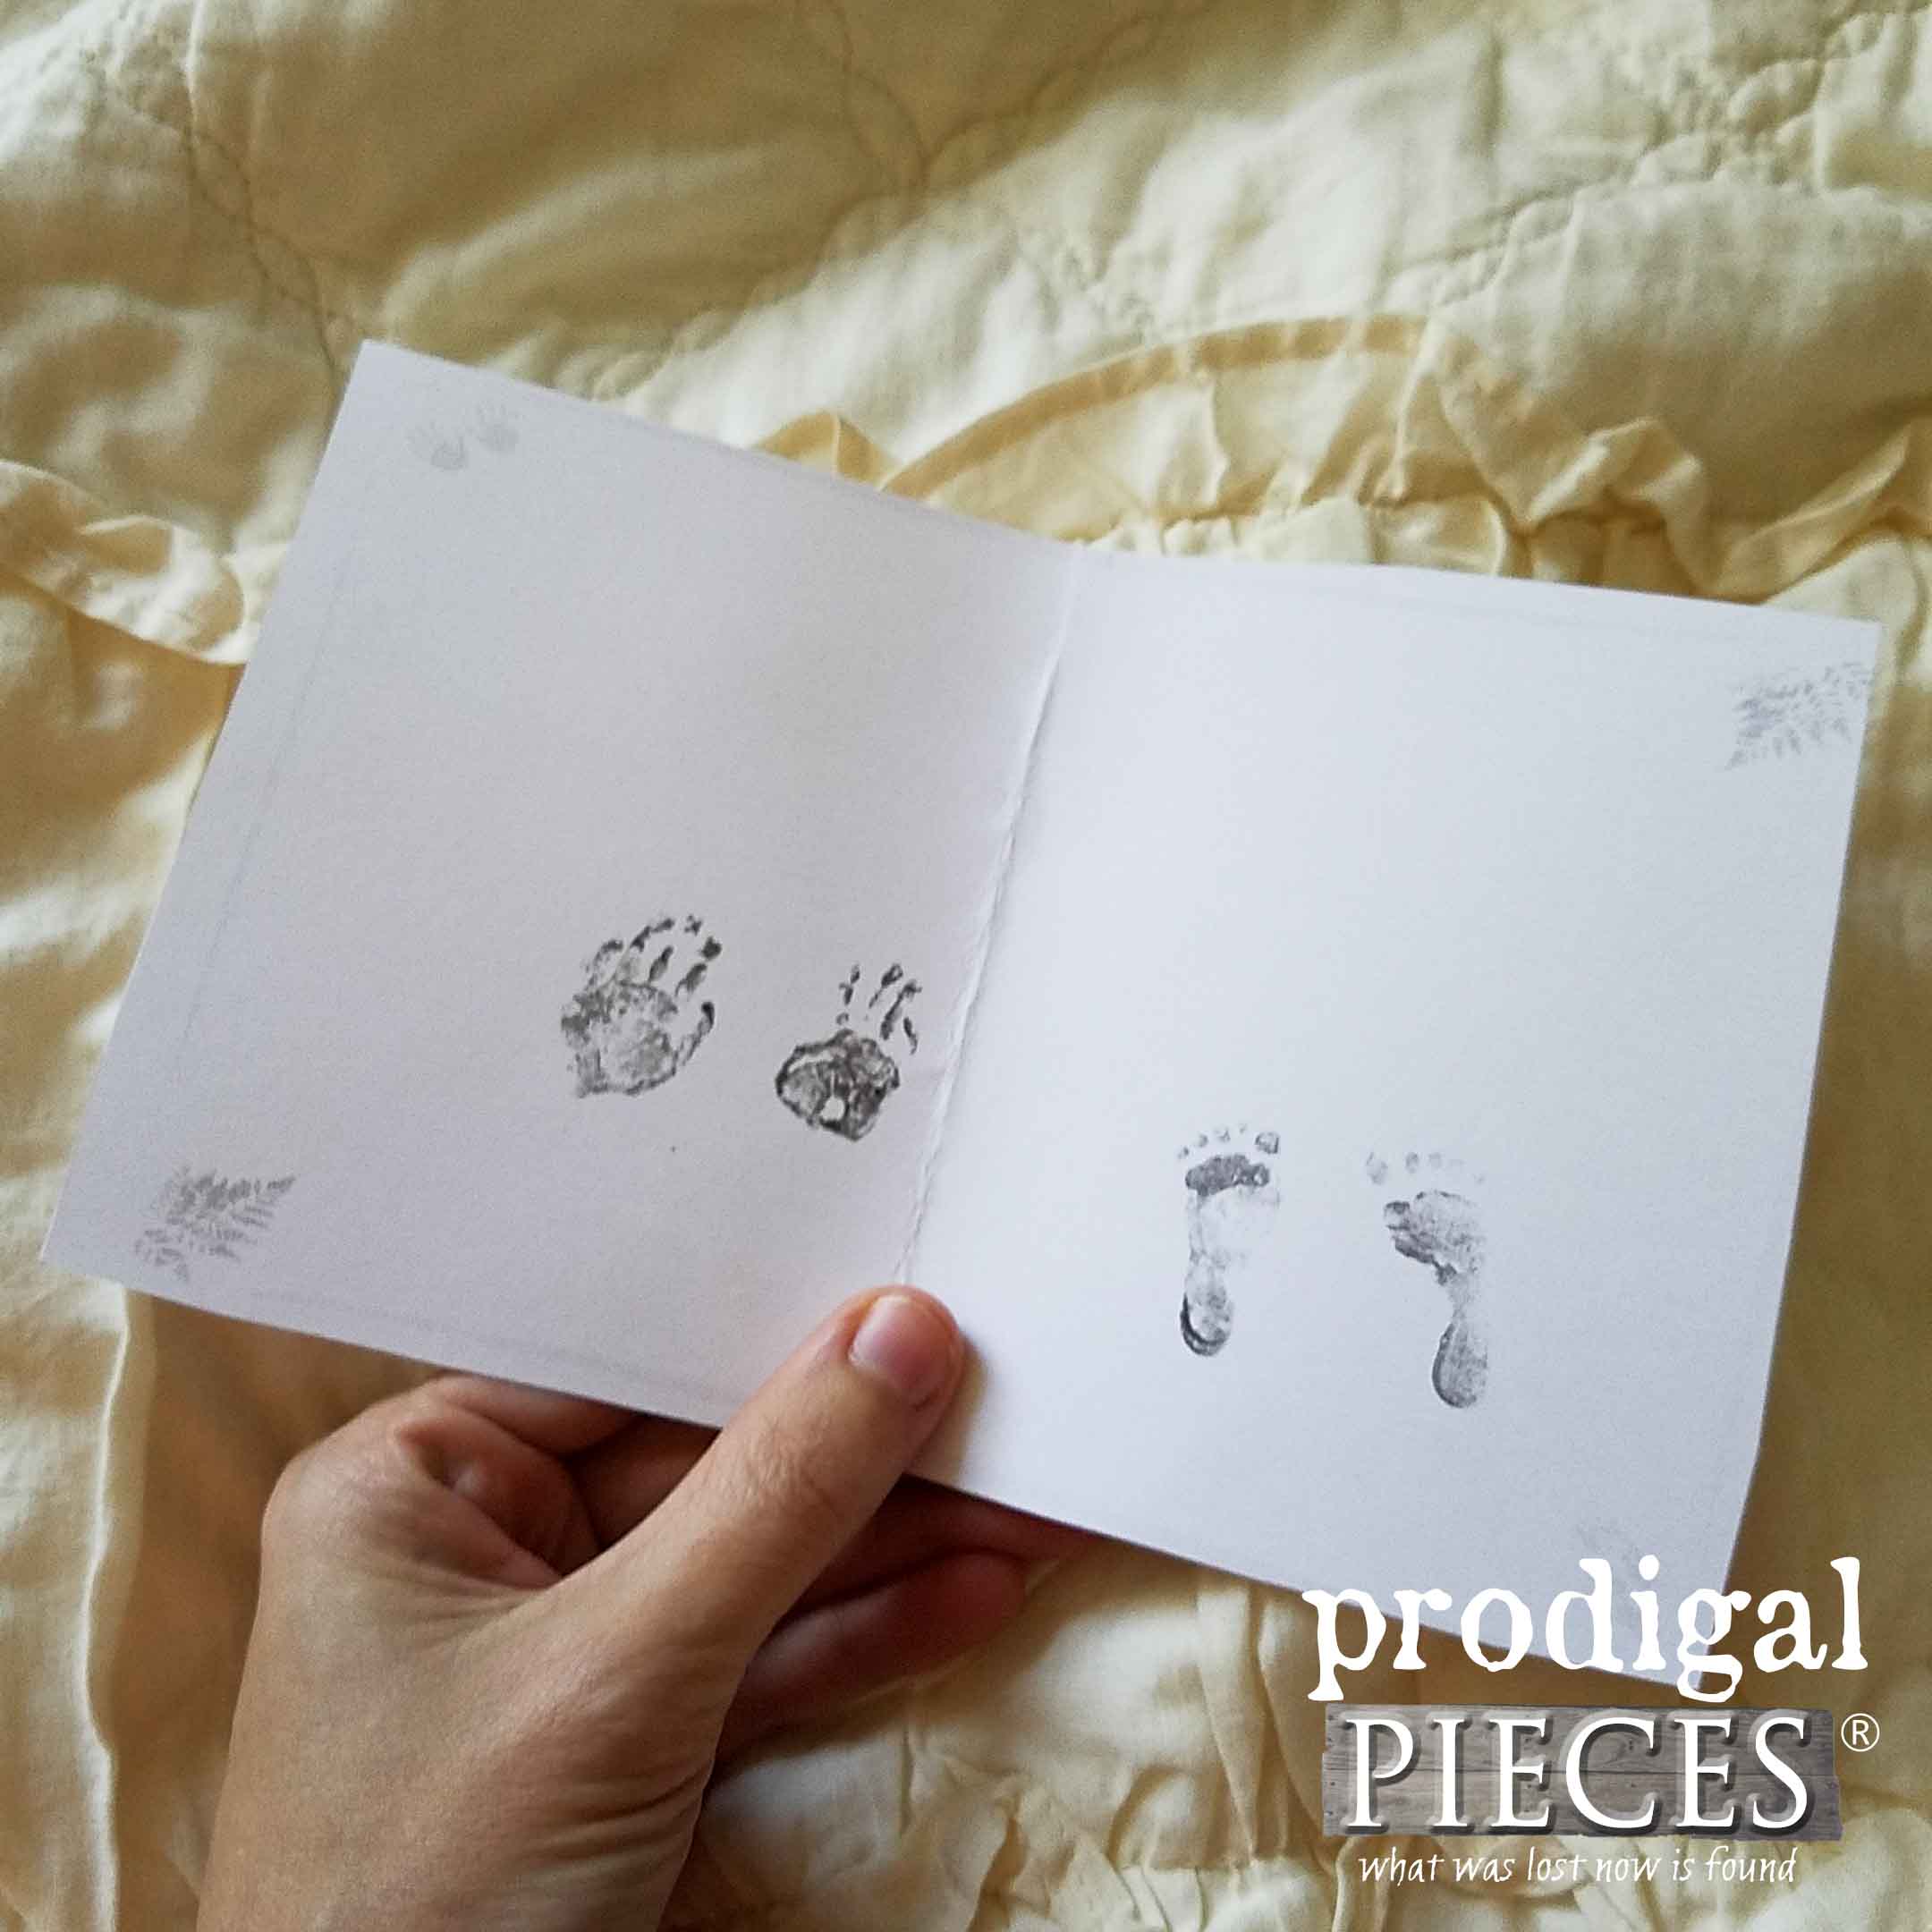 Premature Baby Girl Footprints ~ Healing after Subchorionic Hematoma | Prodigal Pieces | www.prodigalpieces.com